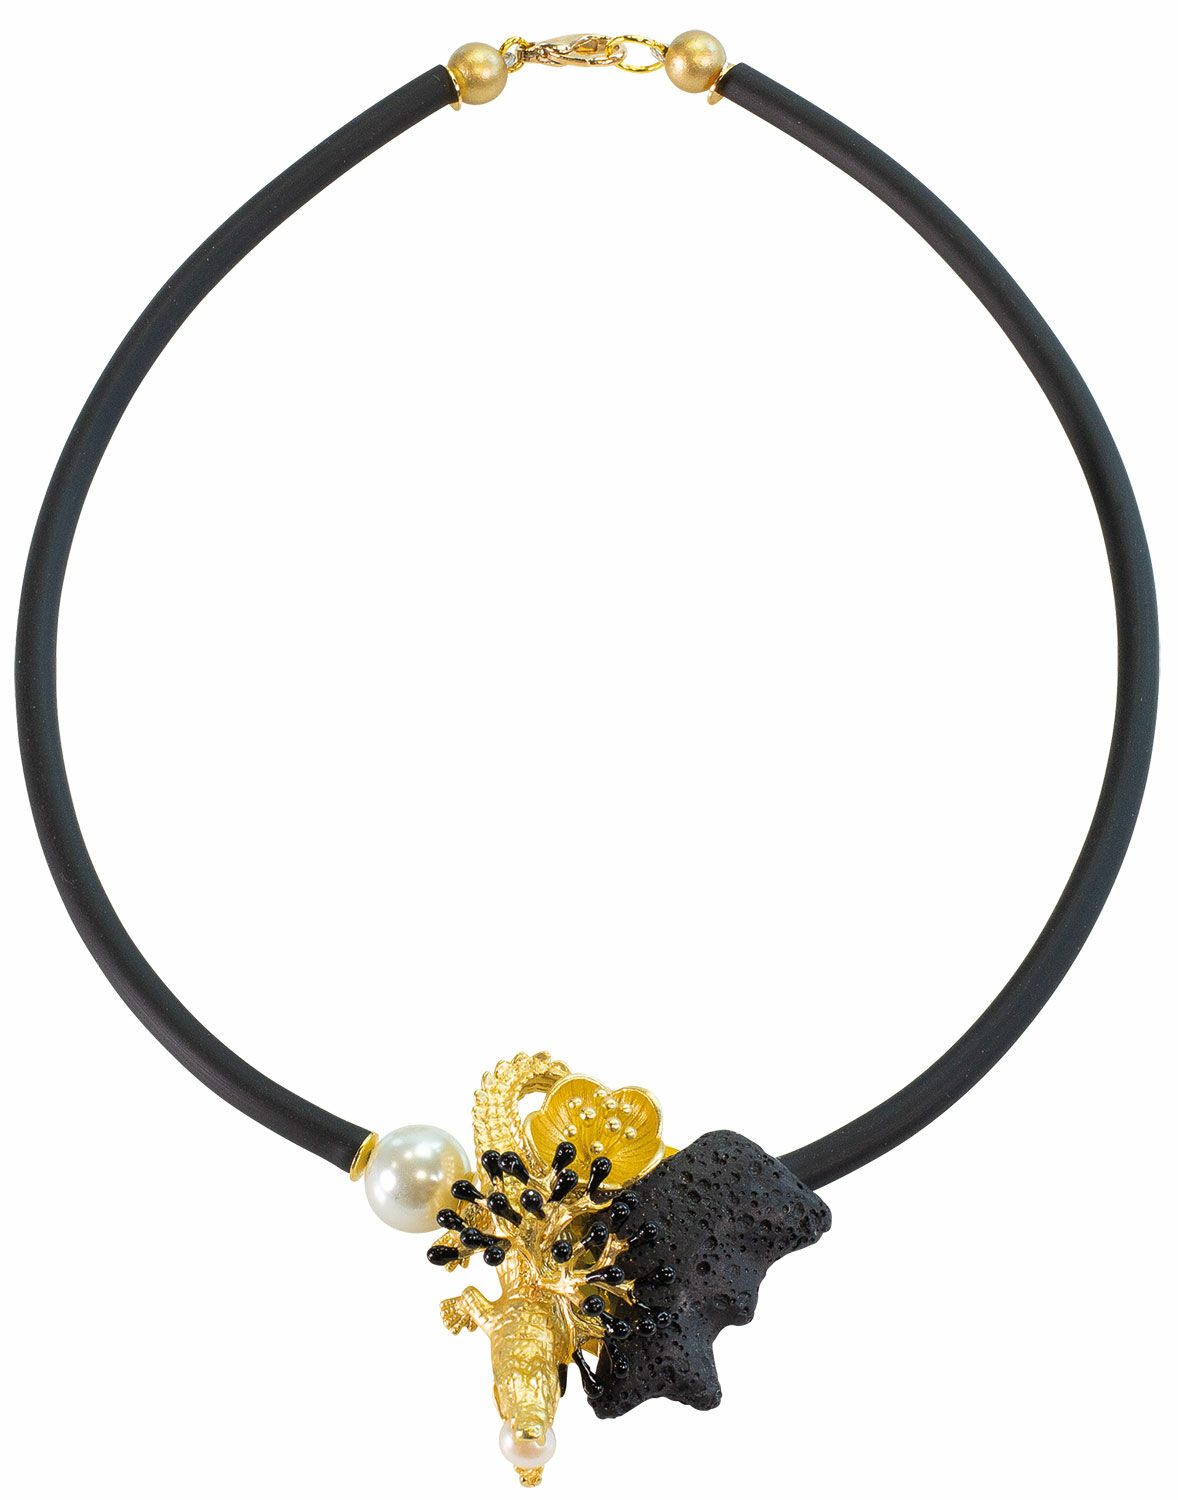 Necklace "Pearls and Blossoms" by Anna Mütz